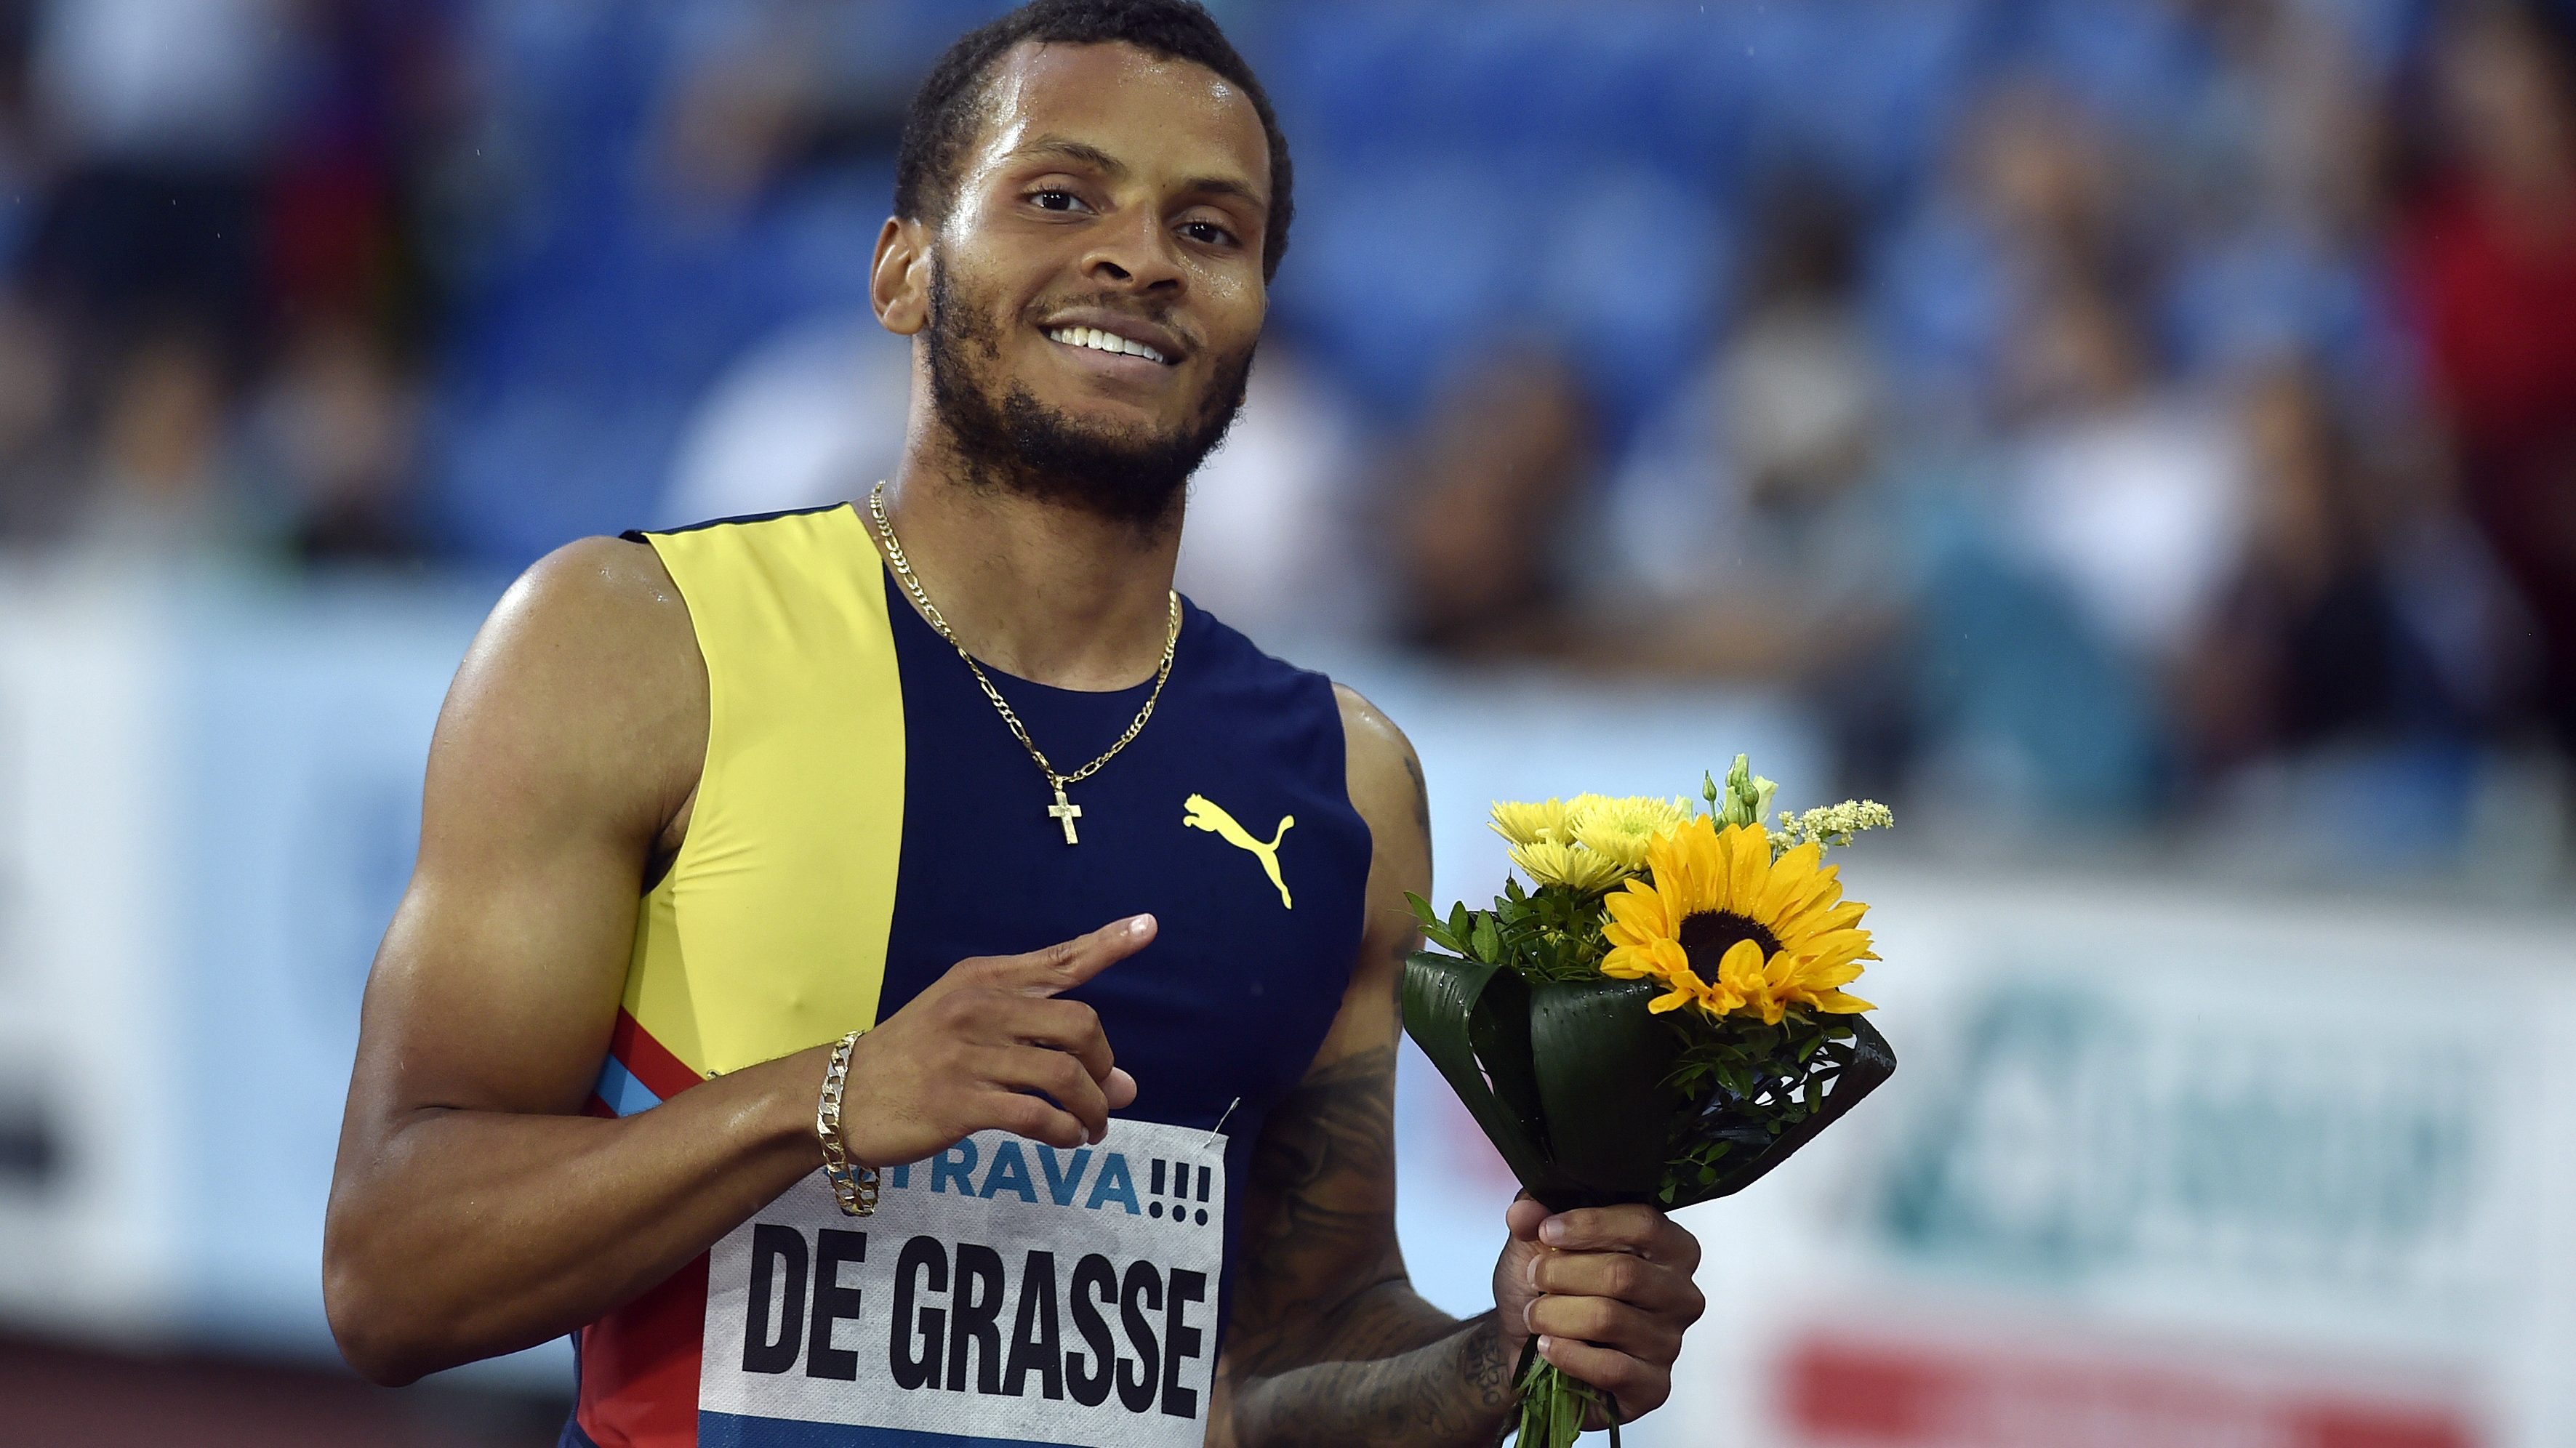 93 yrs on, Andre De Grasse wins Canada's first 200m gold at Tokyo Olympics 2020